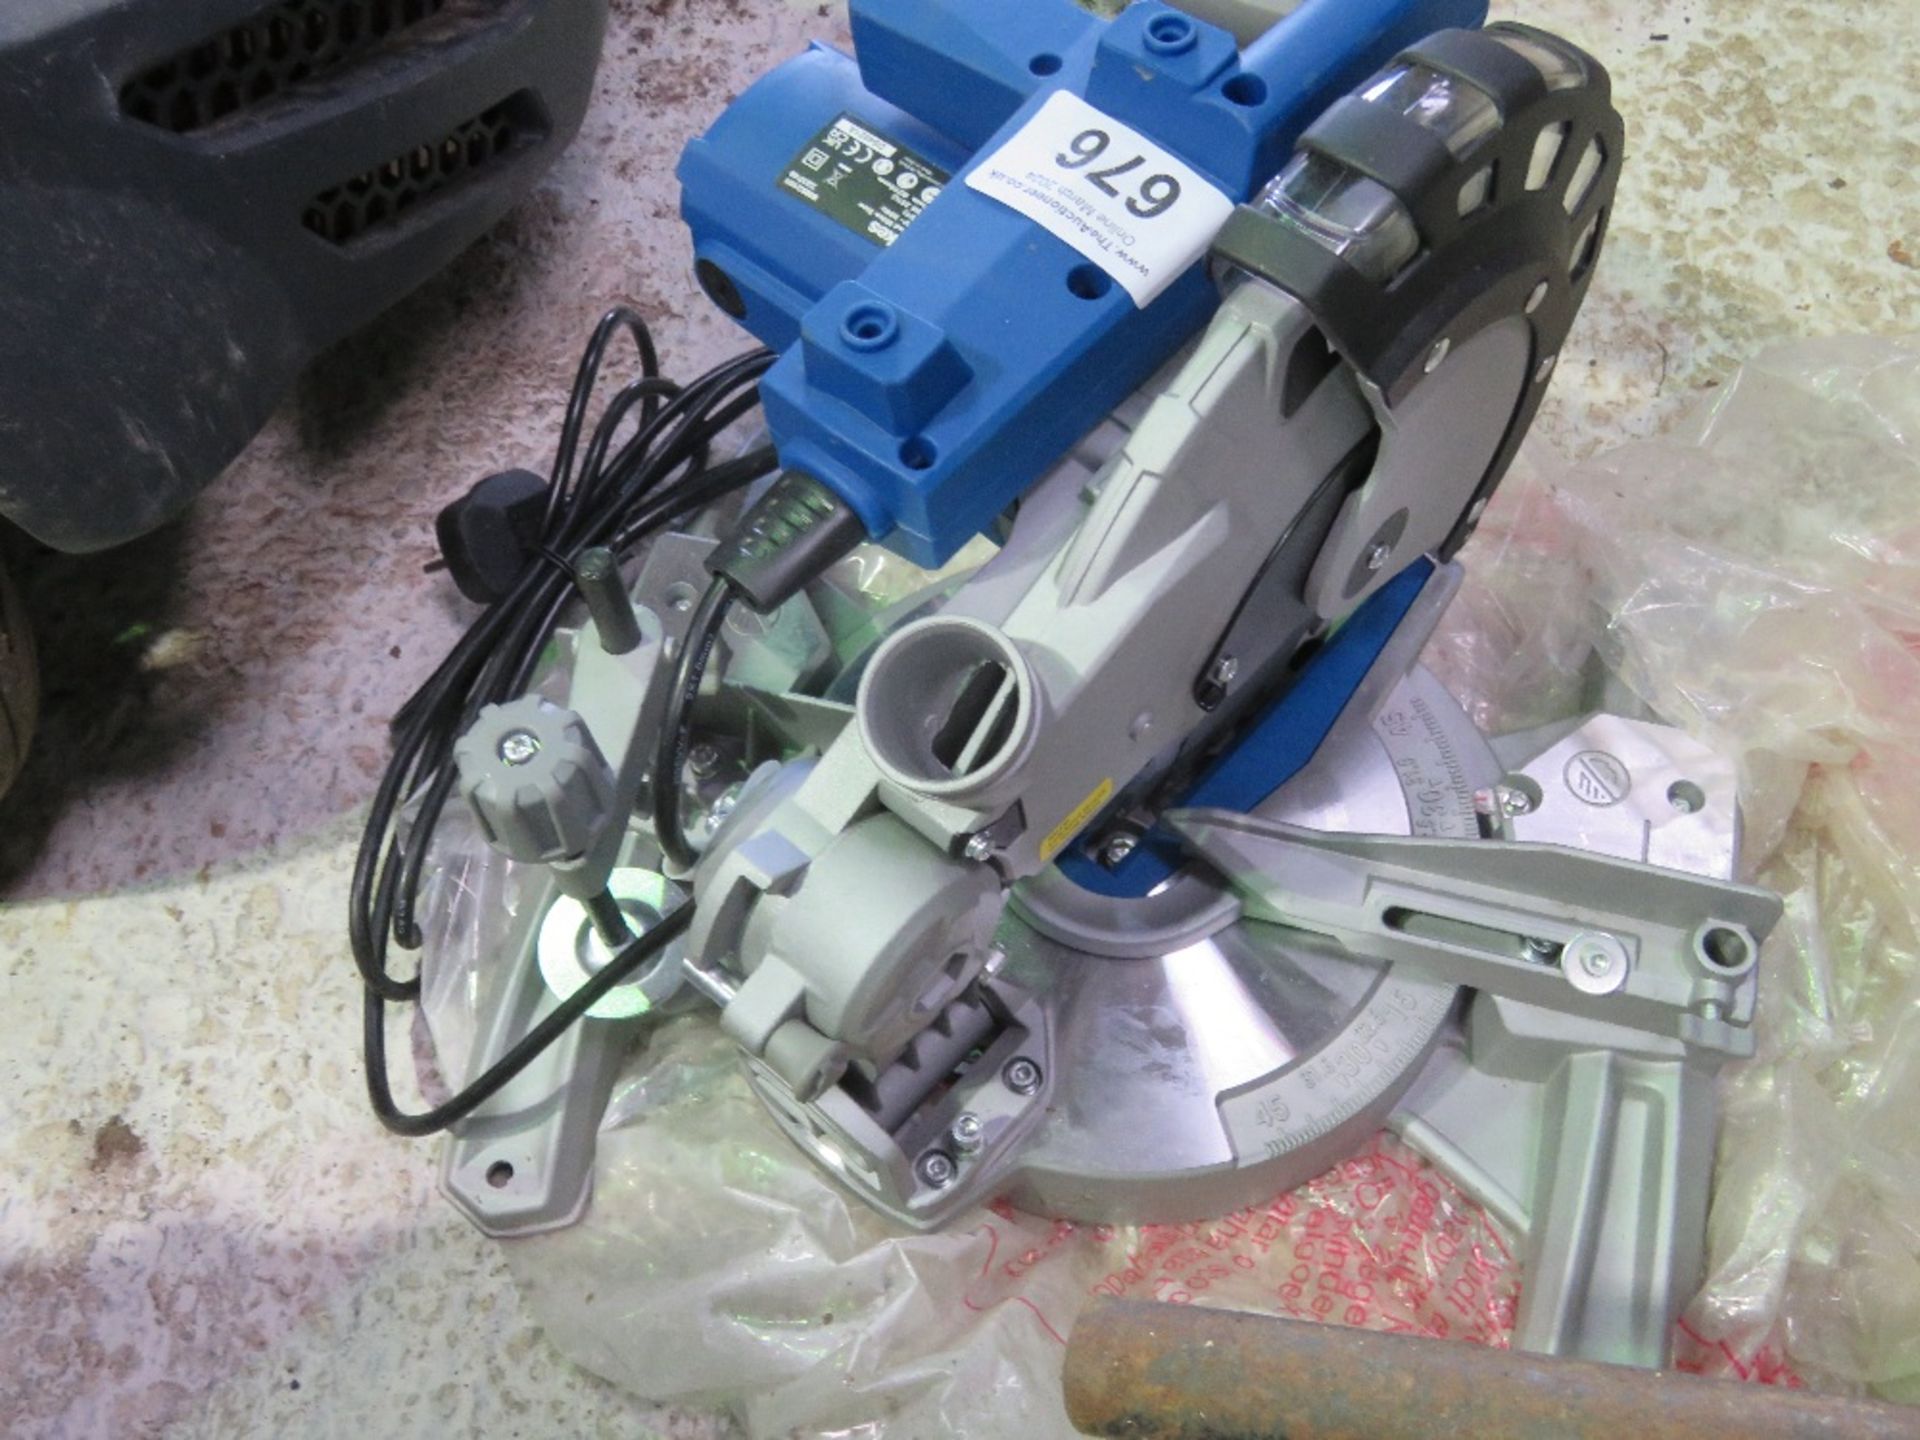 WICKES 240VOLT MITRE SAW, APPEARS LITTLE/UNUSED. THIS LOT IS SOLD UNDER THE AUCTIONEERS MARGIN SC - Bild 3 aus 4